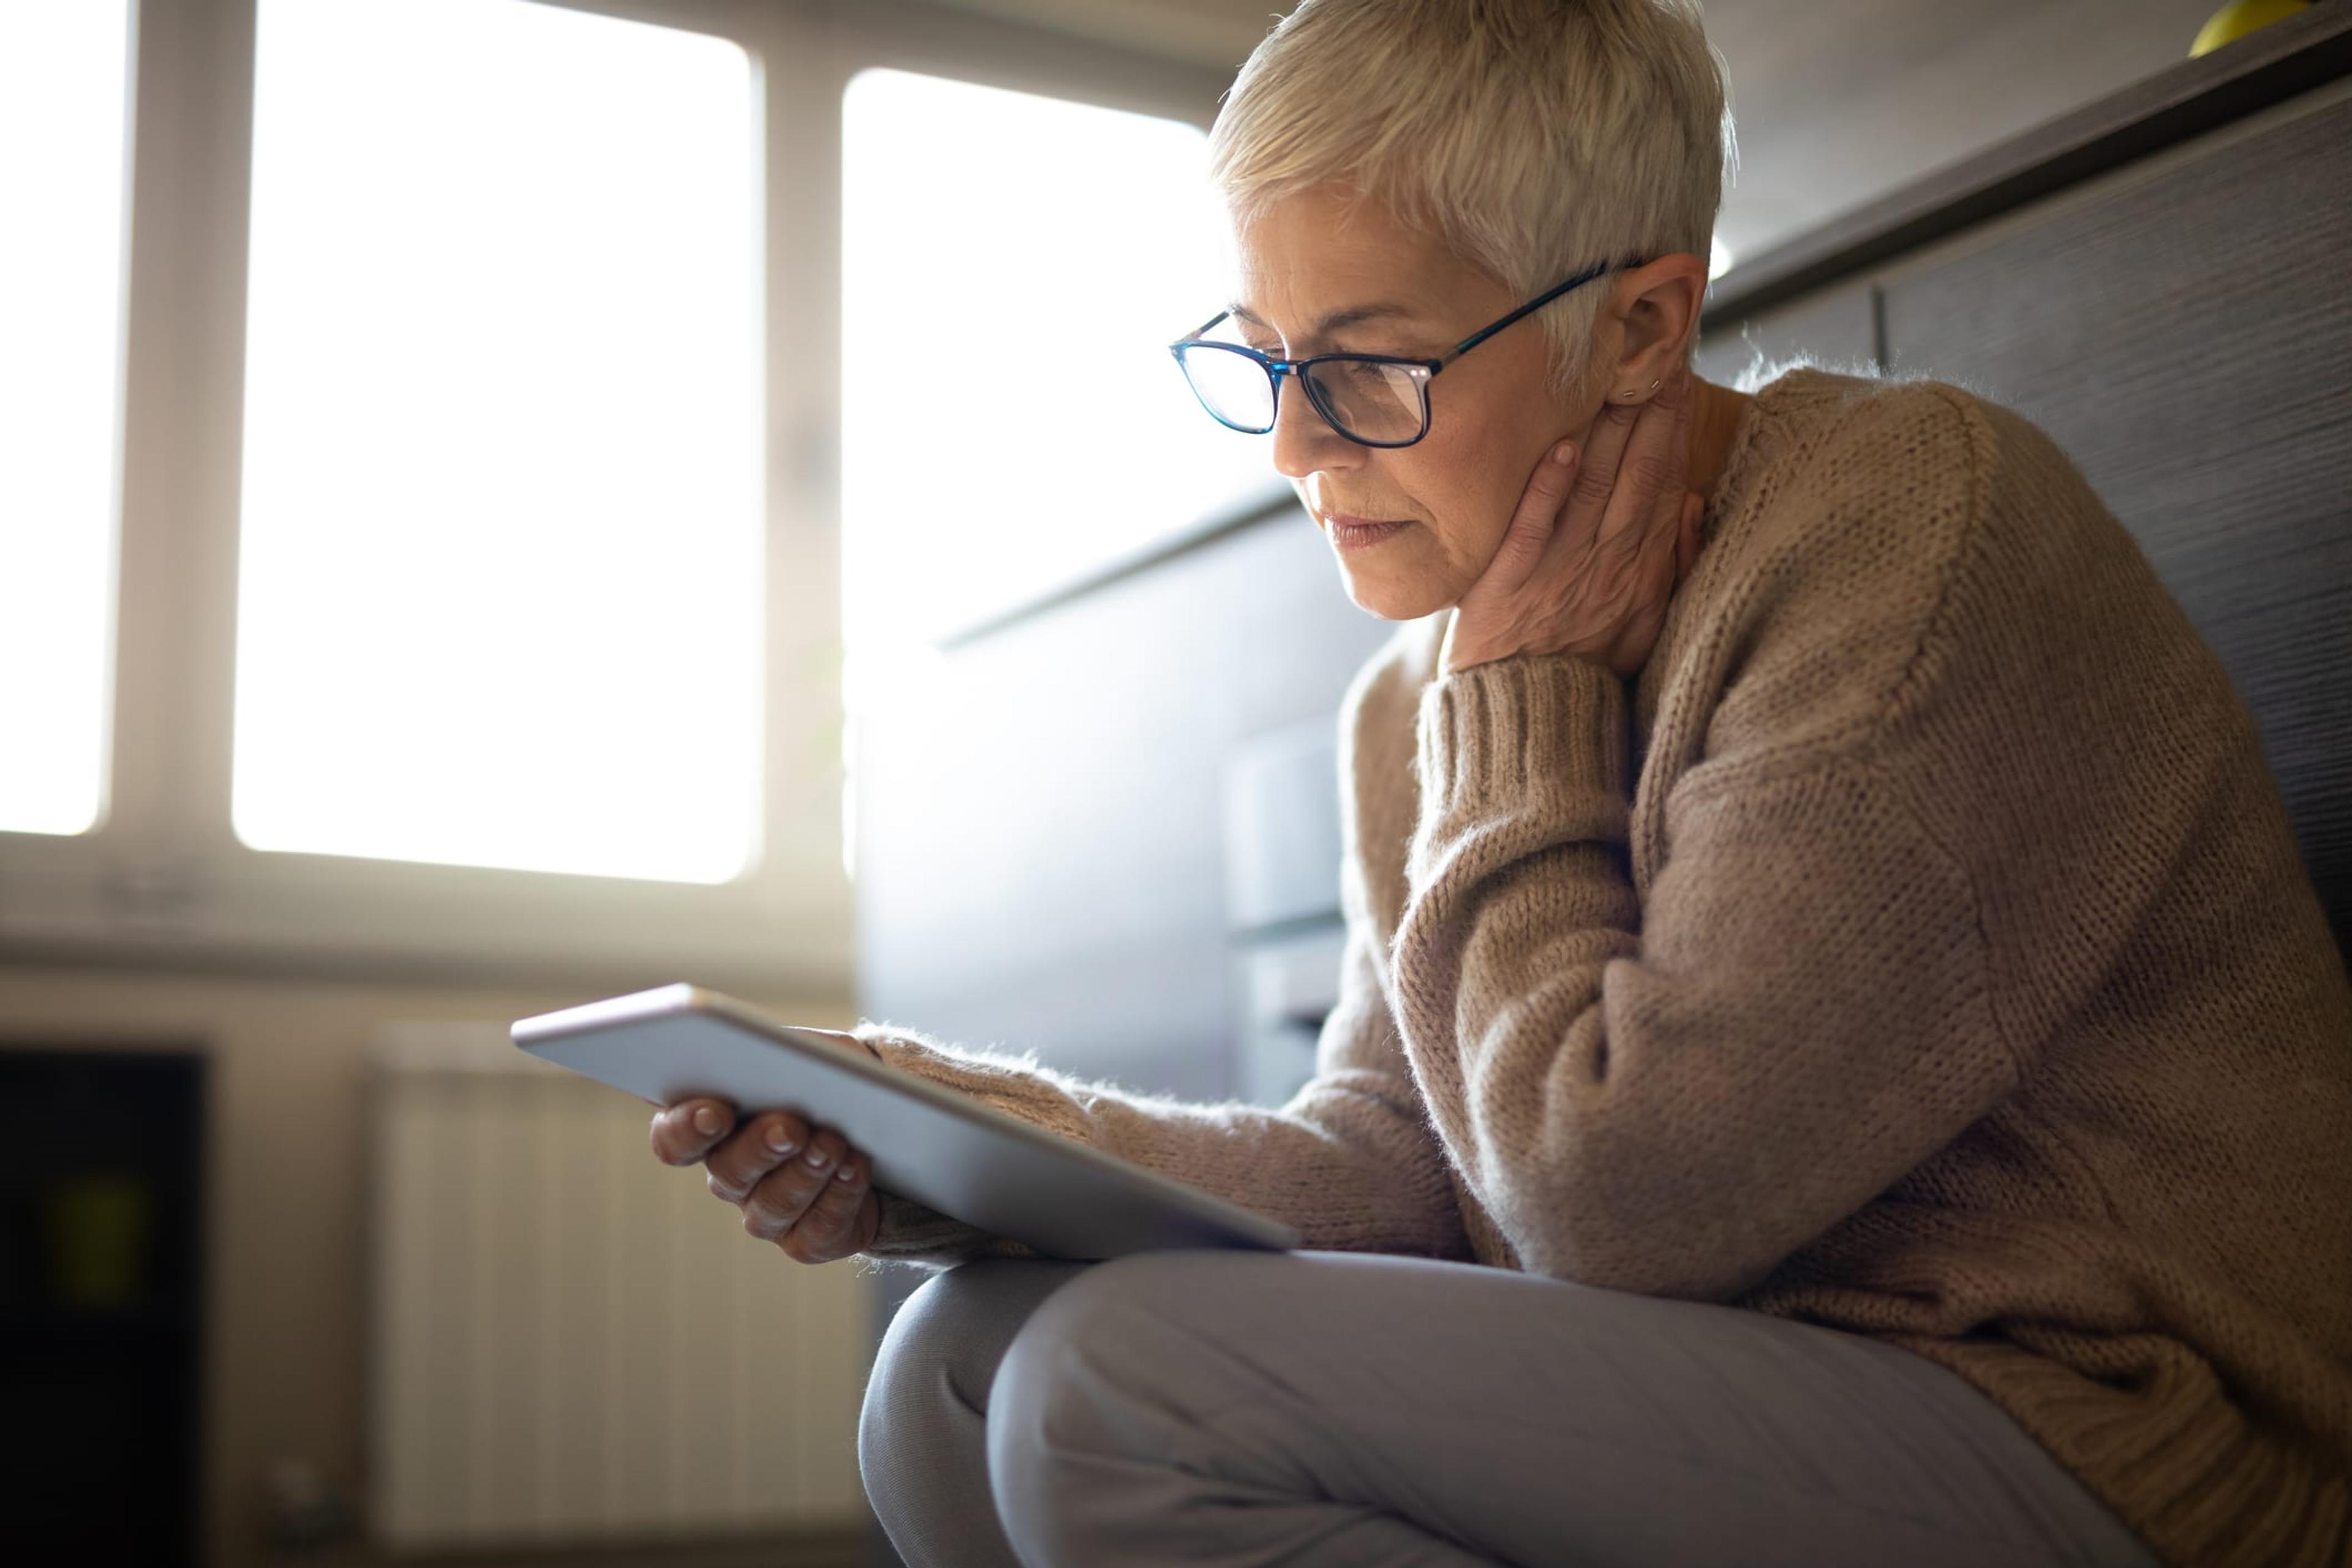 Worried senior woman reading an e-mail on tablet